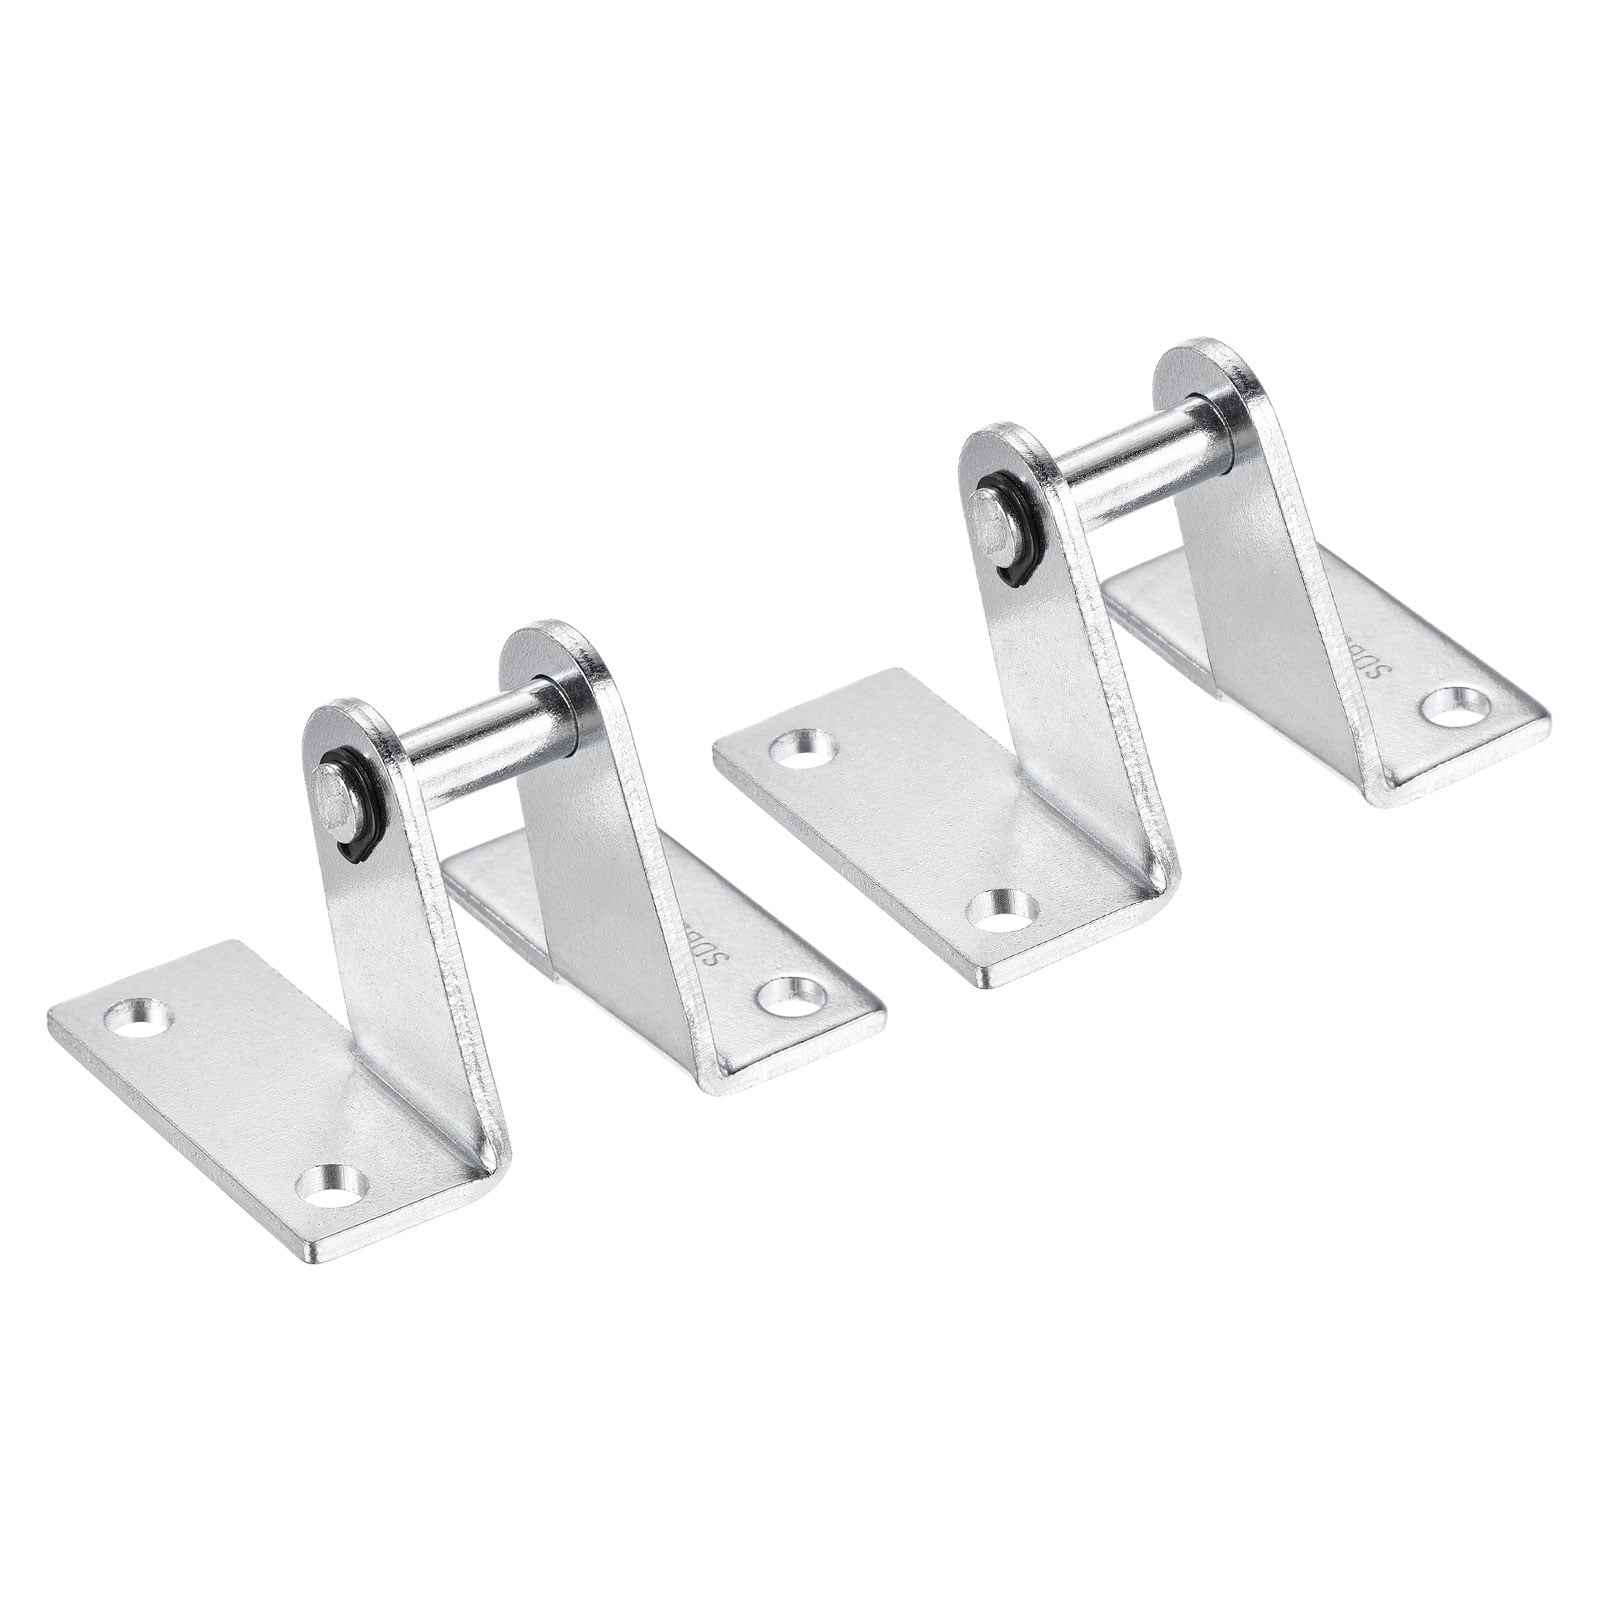 Cylinder Clevis Mounting Bracket 4 Bolt Holes Pneumatic Parts for 16mm Bore 2pcs 